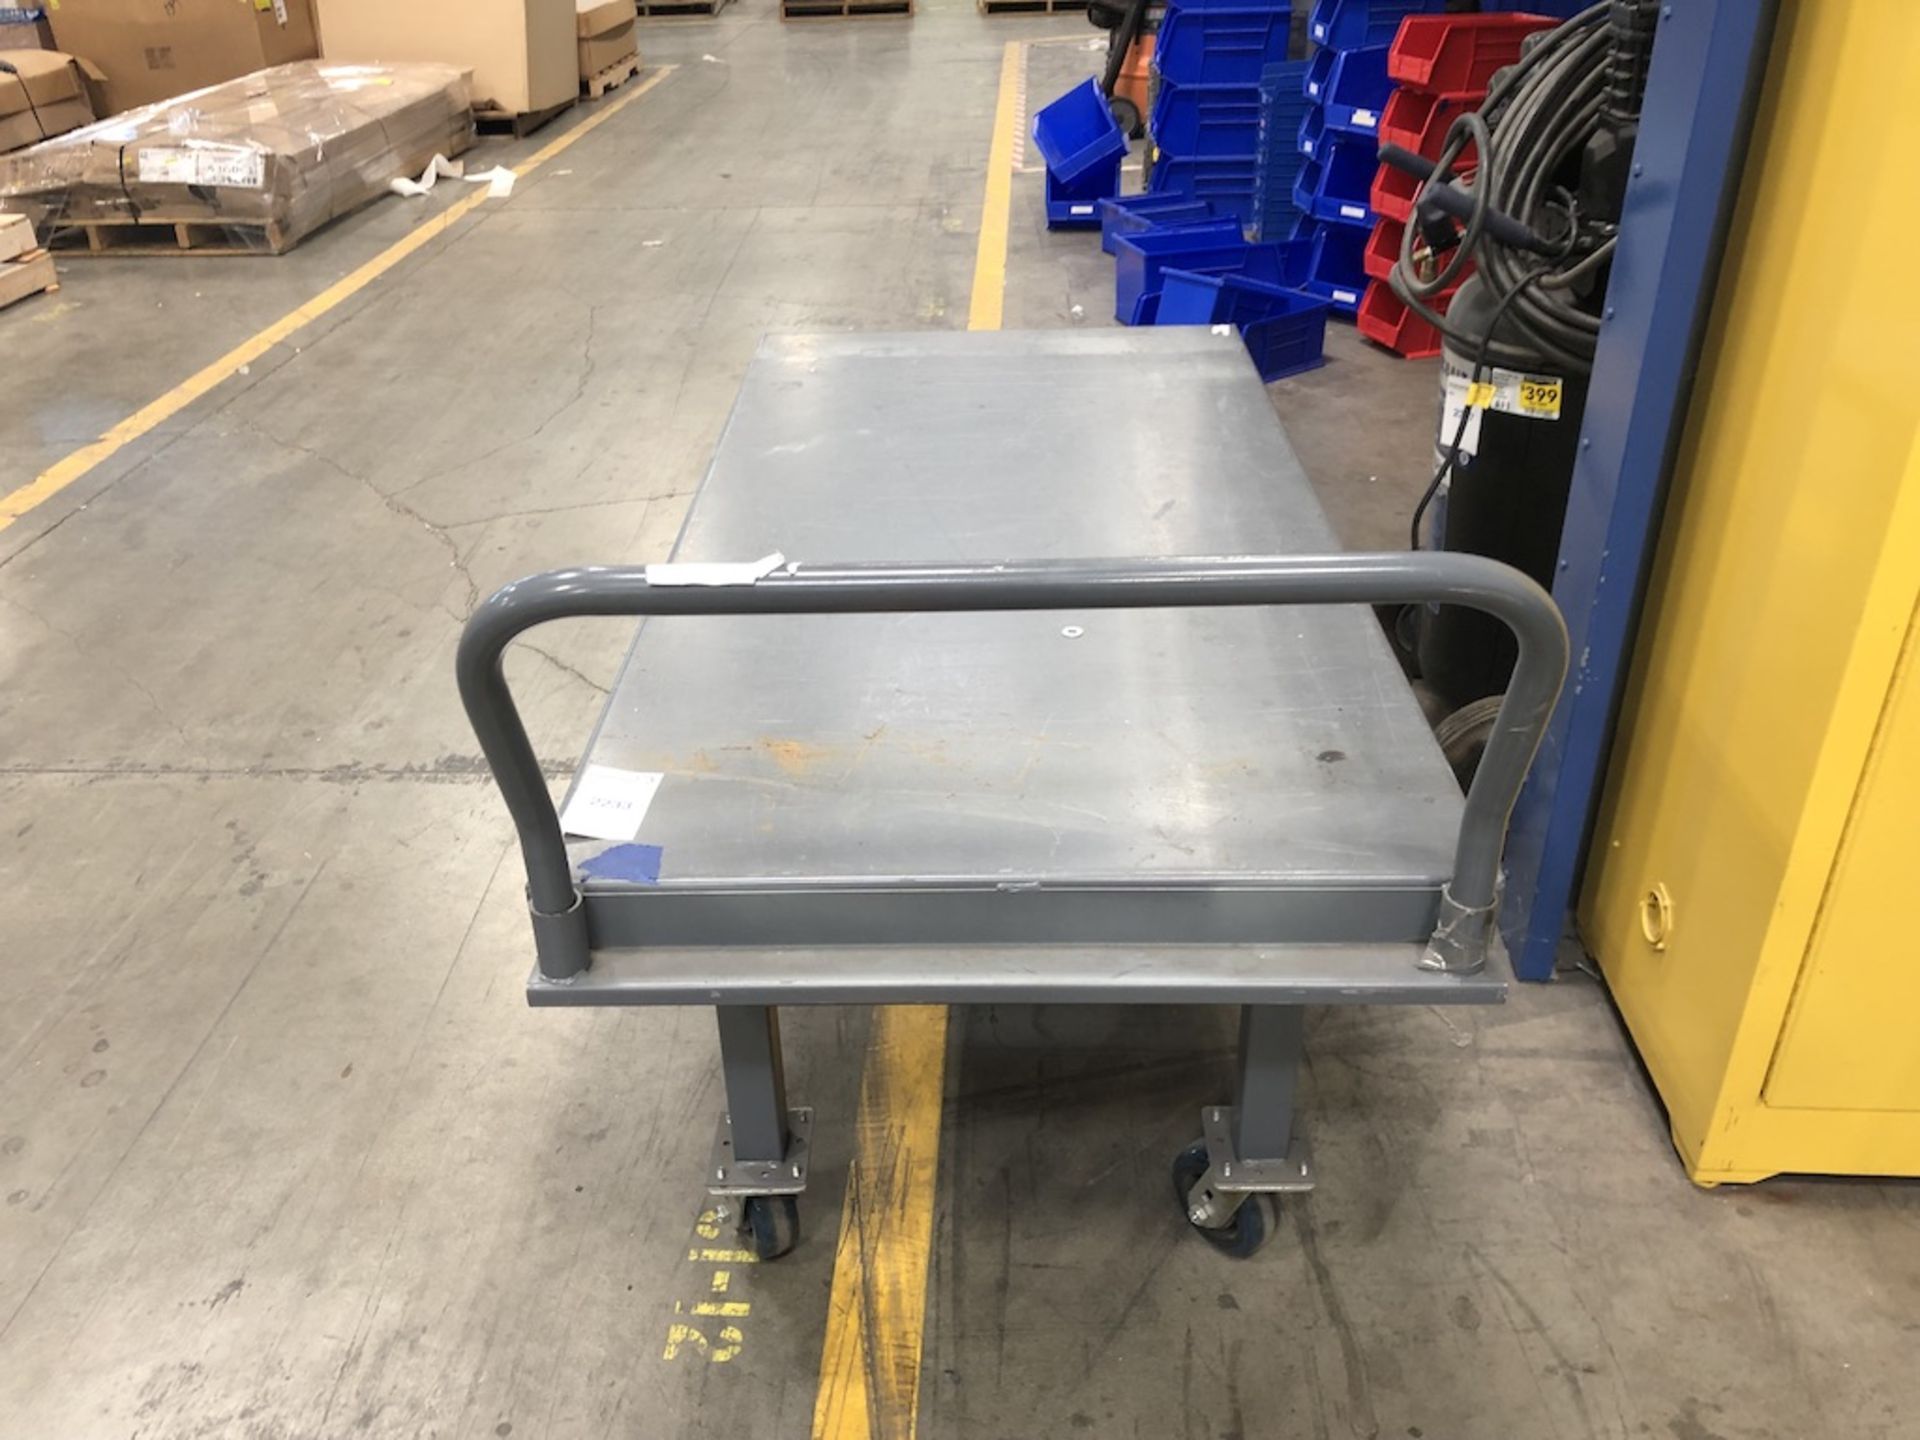 ULINE STEEL PLATFORM CART ( CONTENTS NOT INCLUDED ) 64IN L X 30 IN W X 37 IN H - Image 5 of 7